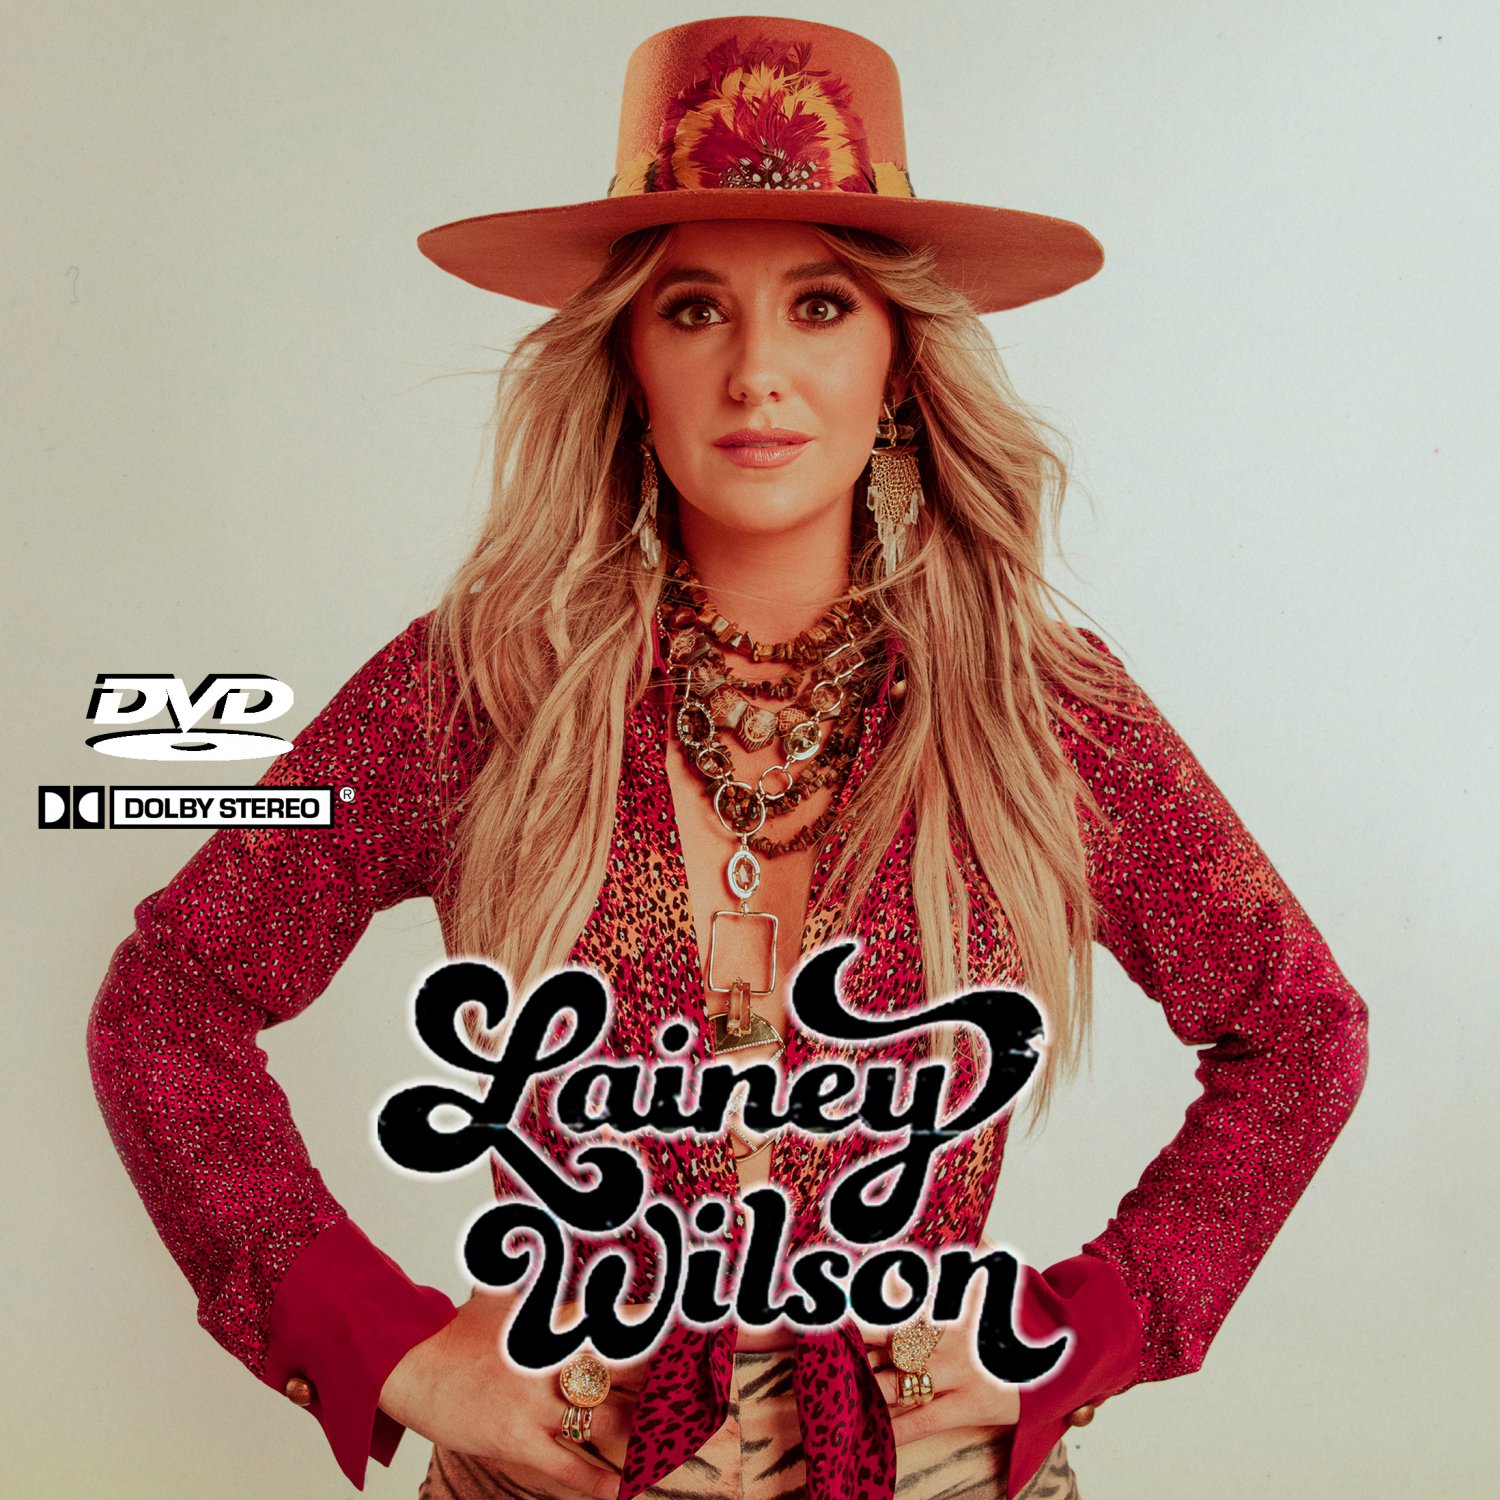 Lainey Wilson Music Videos Collection (1 DVD) 31 Music Videos